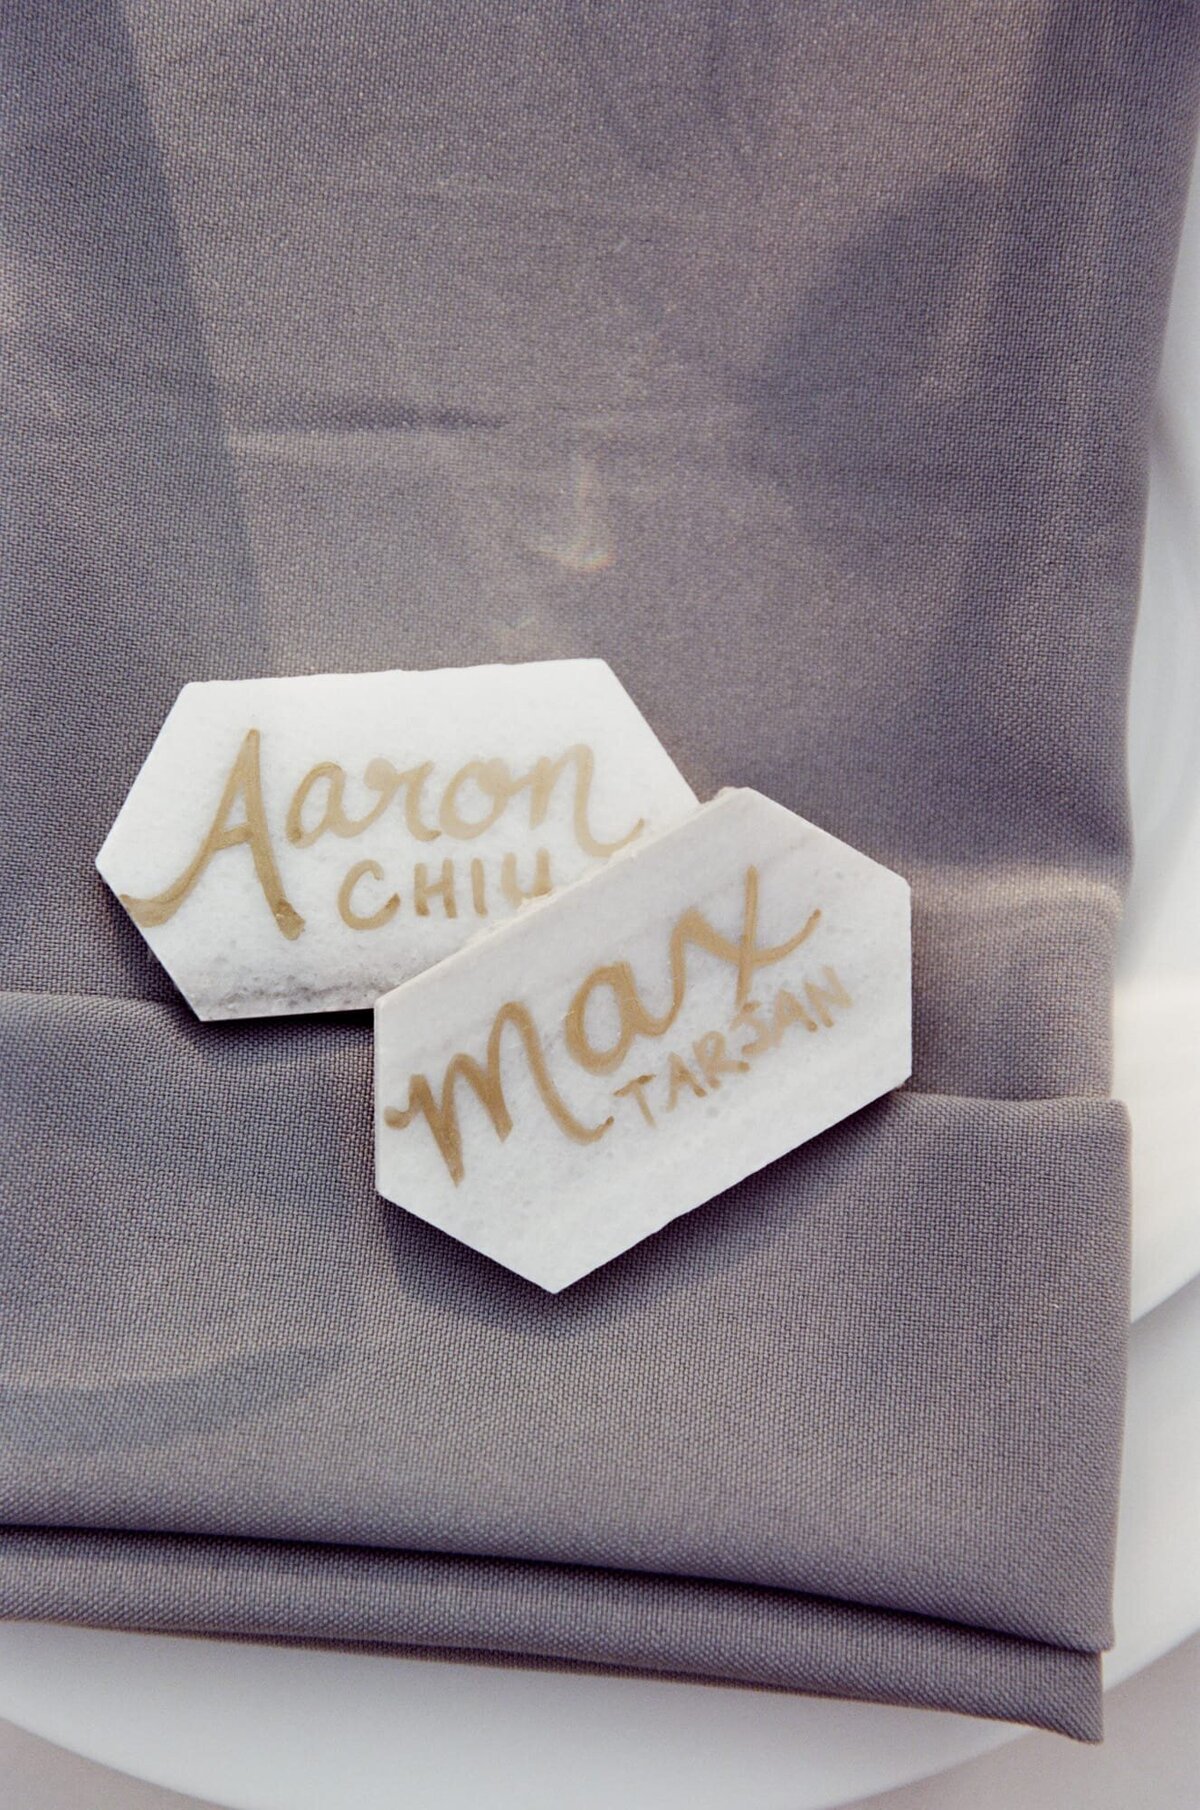 Wedding token with the names of bride and groom.